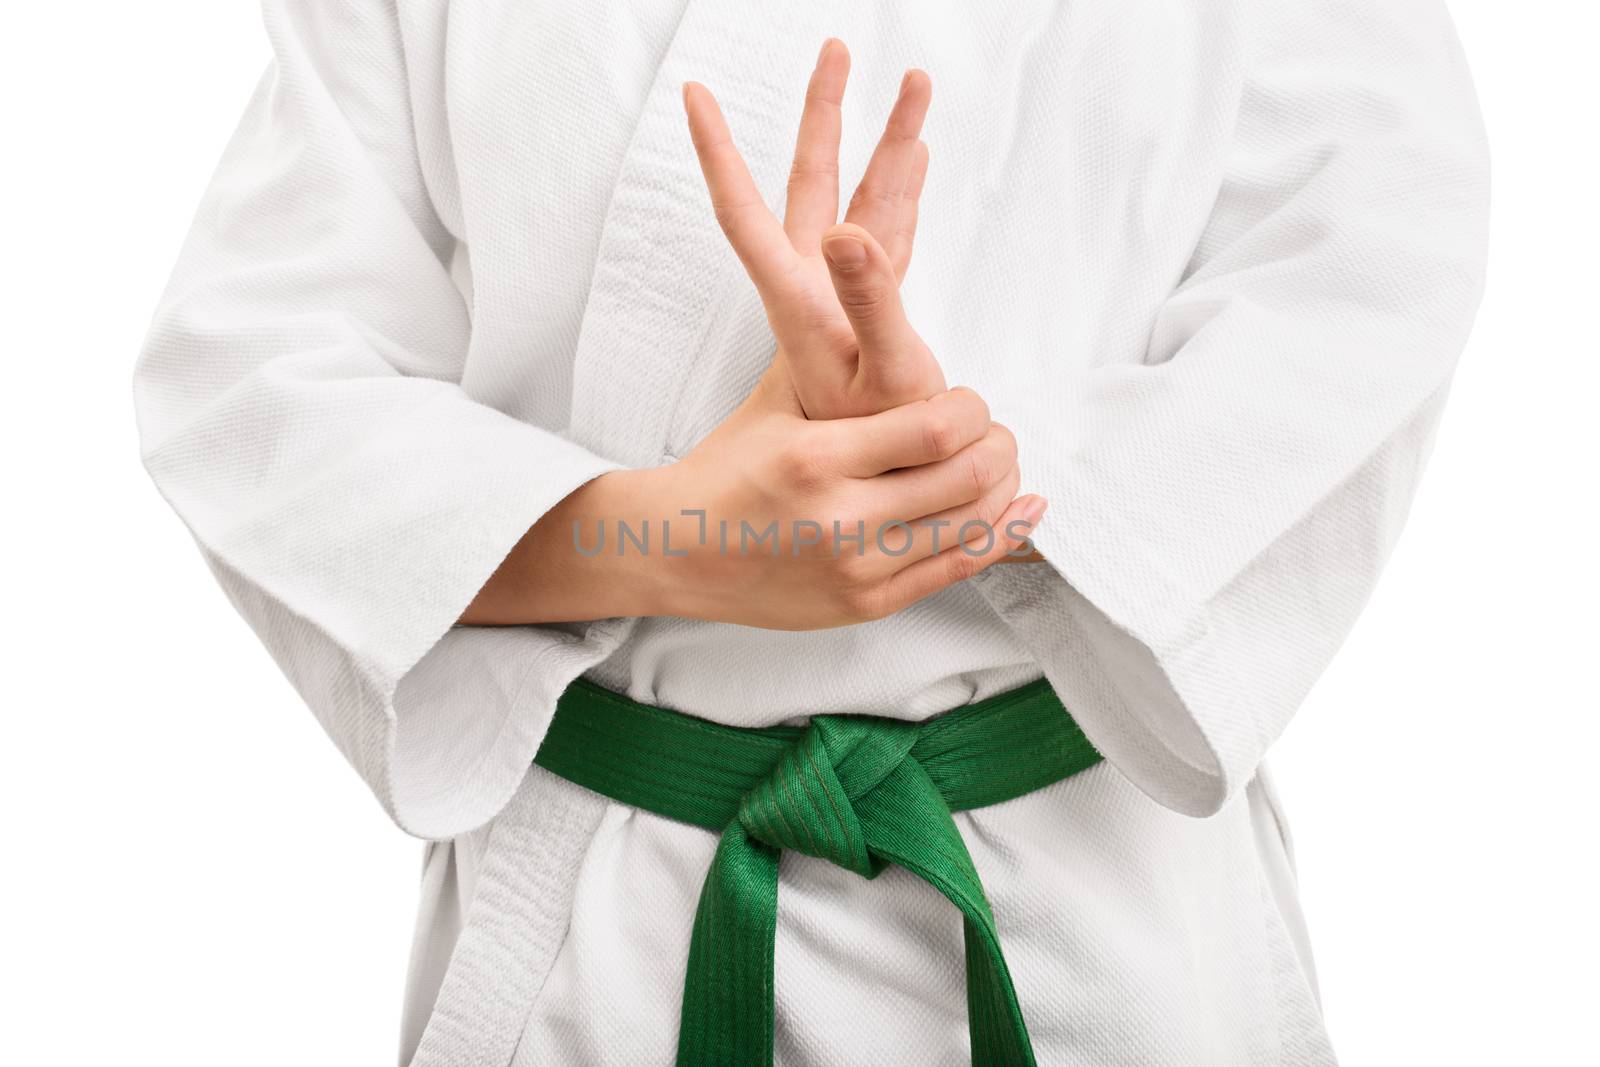 Mid section of a martial arts fighter in white kimono with green belt stretching and twisting her hand, isolated on white background.